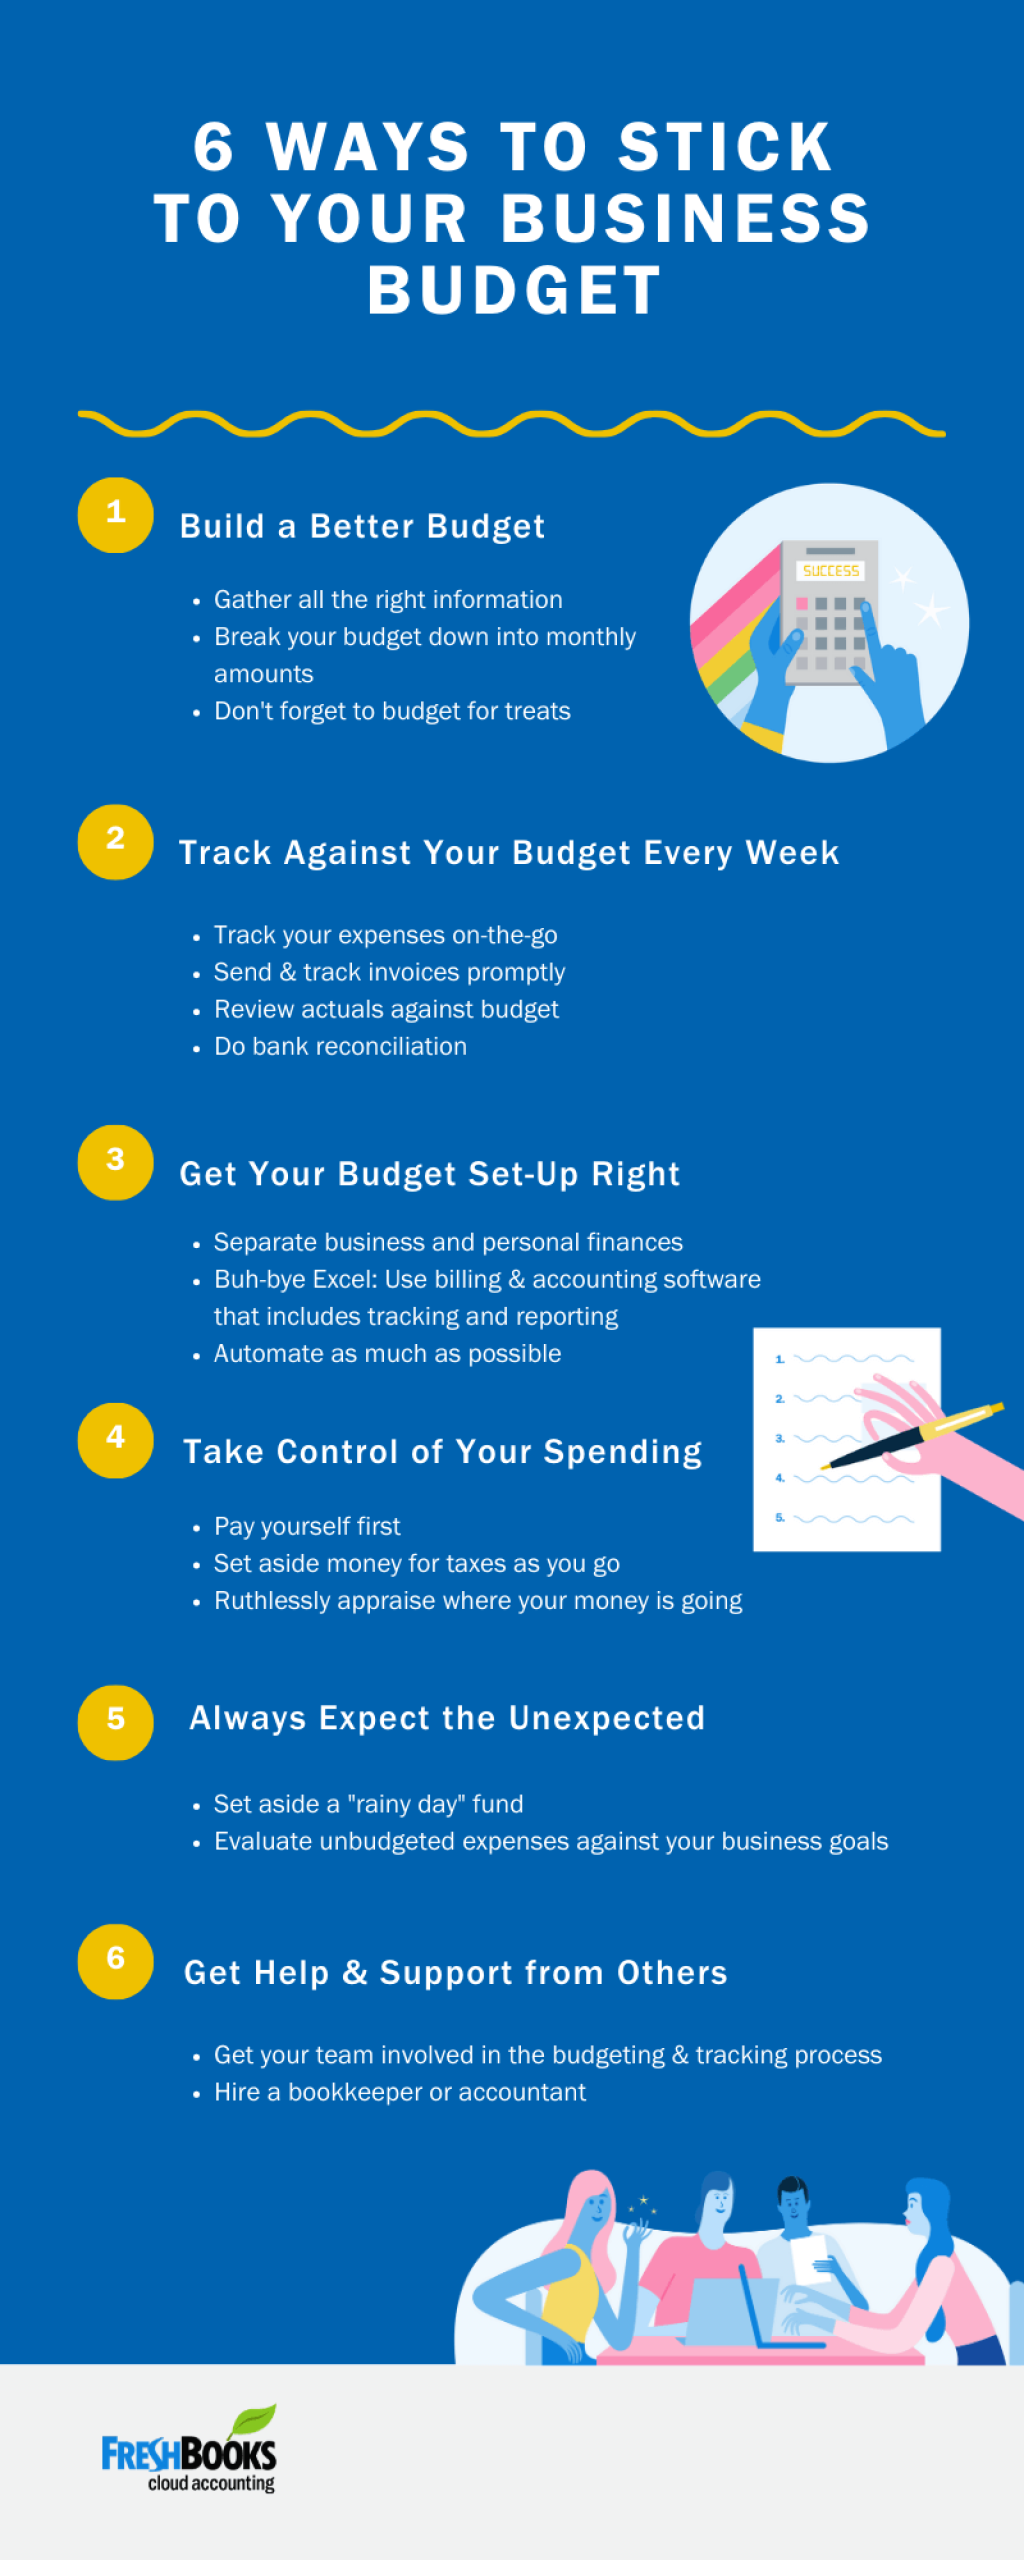 6 budgeting tips - Better Budget Management: How to Stick to a Budget  FreshBooks Blog